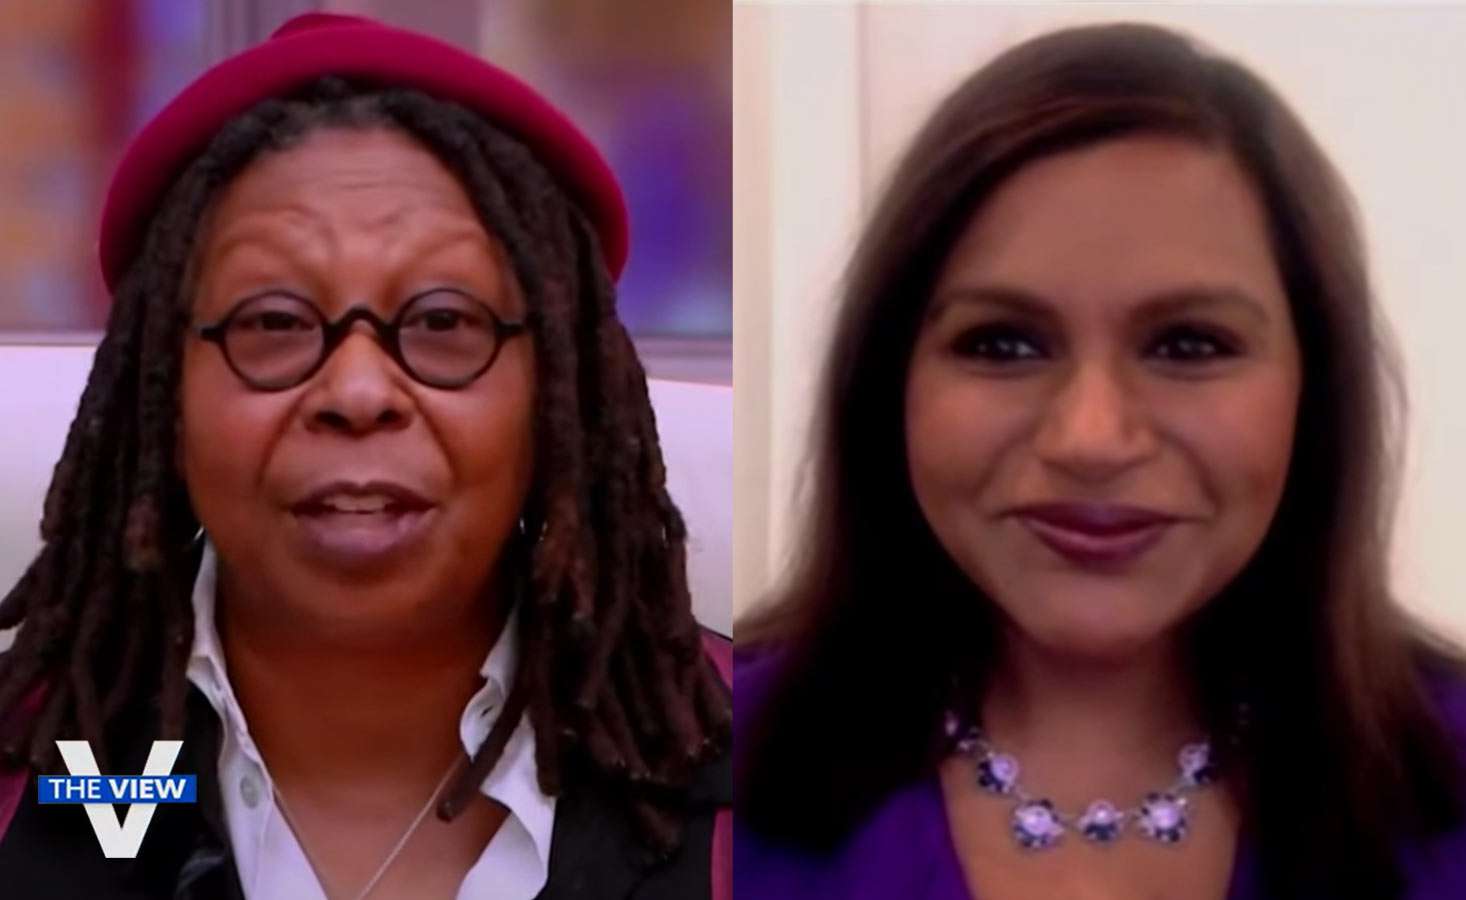 Mindy Kaling and Whoopi Goldberg on “The View” Nov. 30, 2020, discussing supporting PanCAN